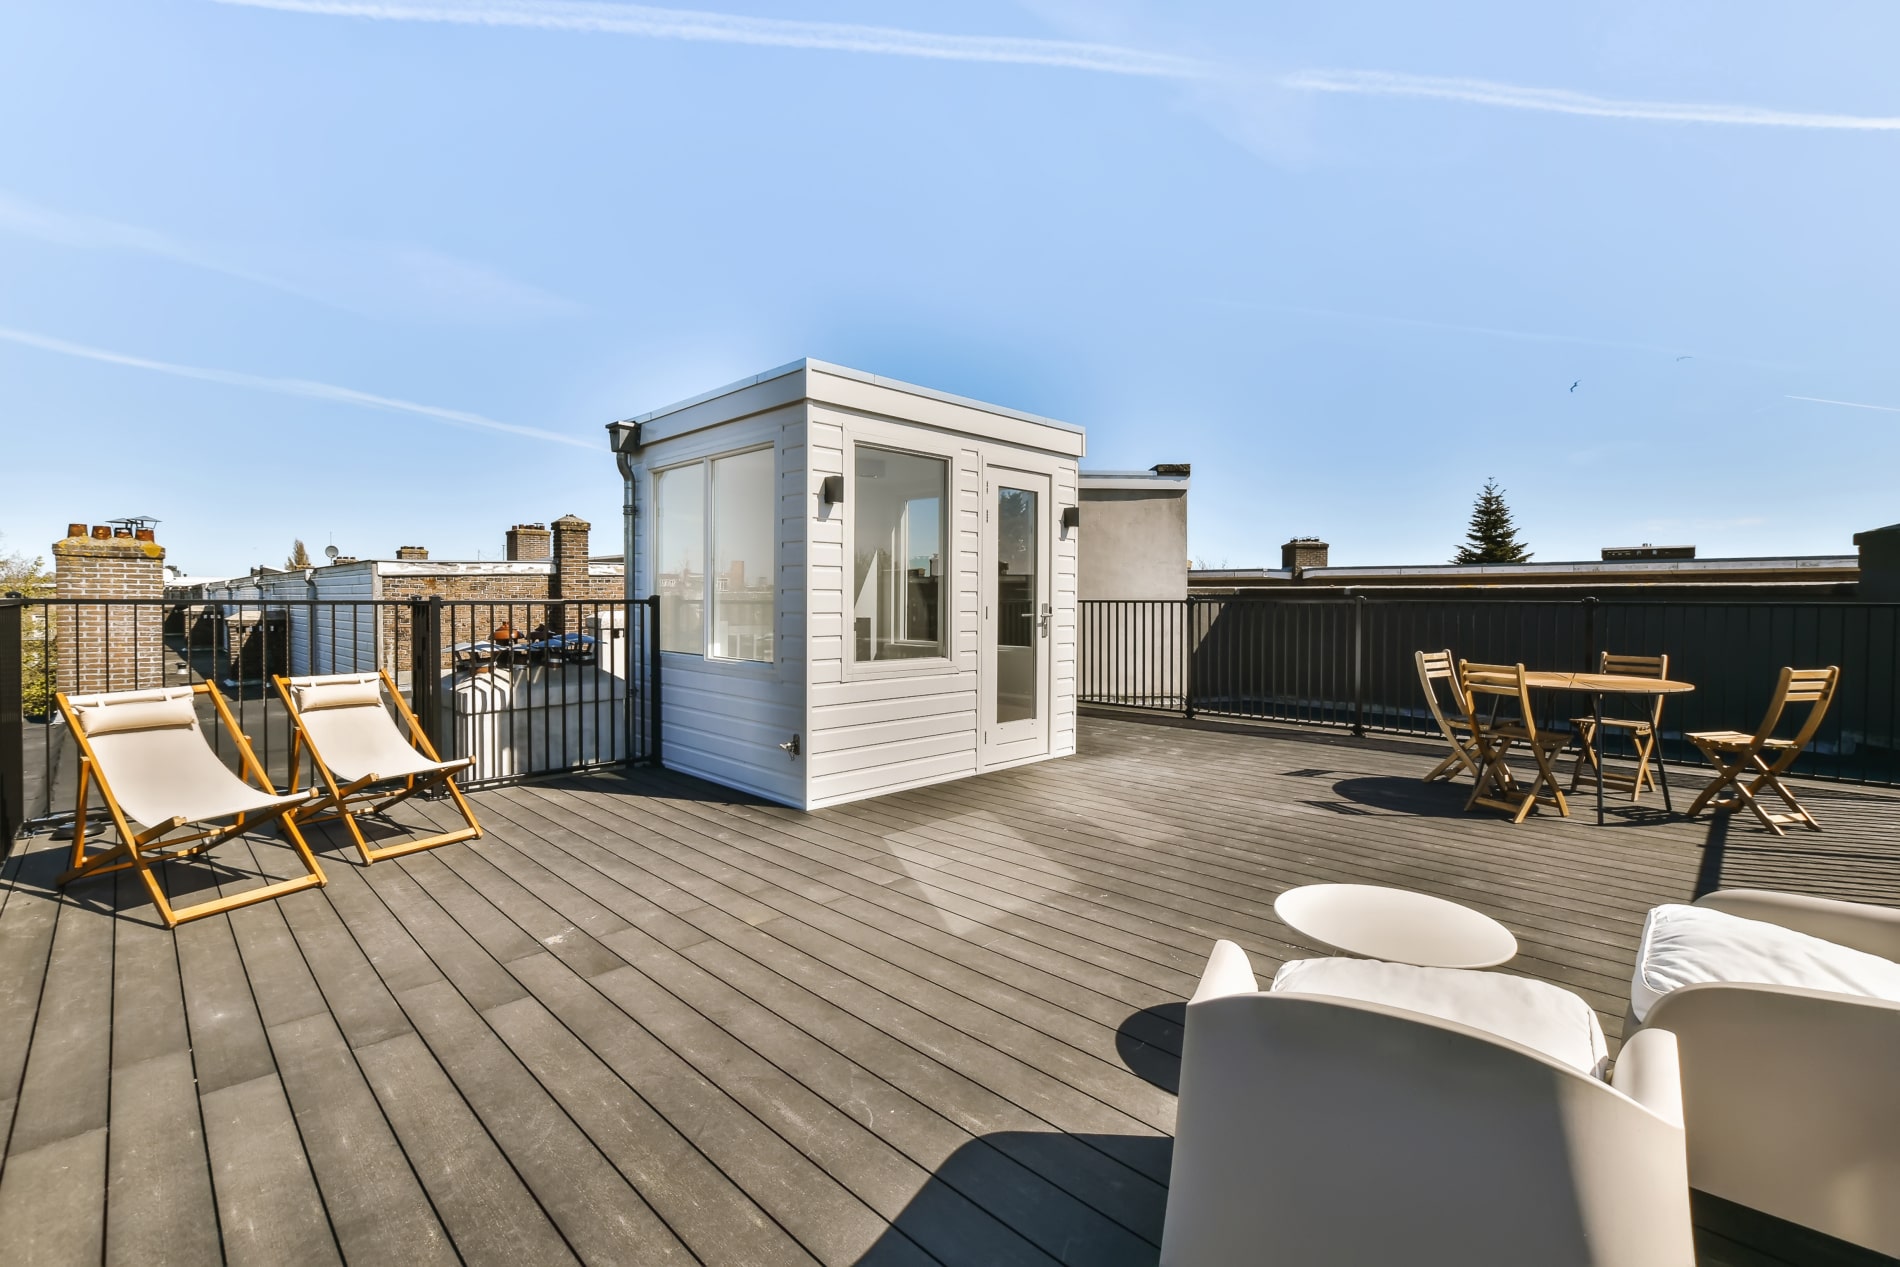 A rooftop deck with chairs and a small shed on